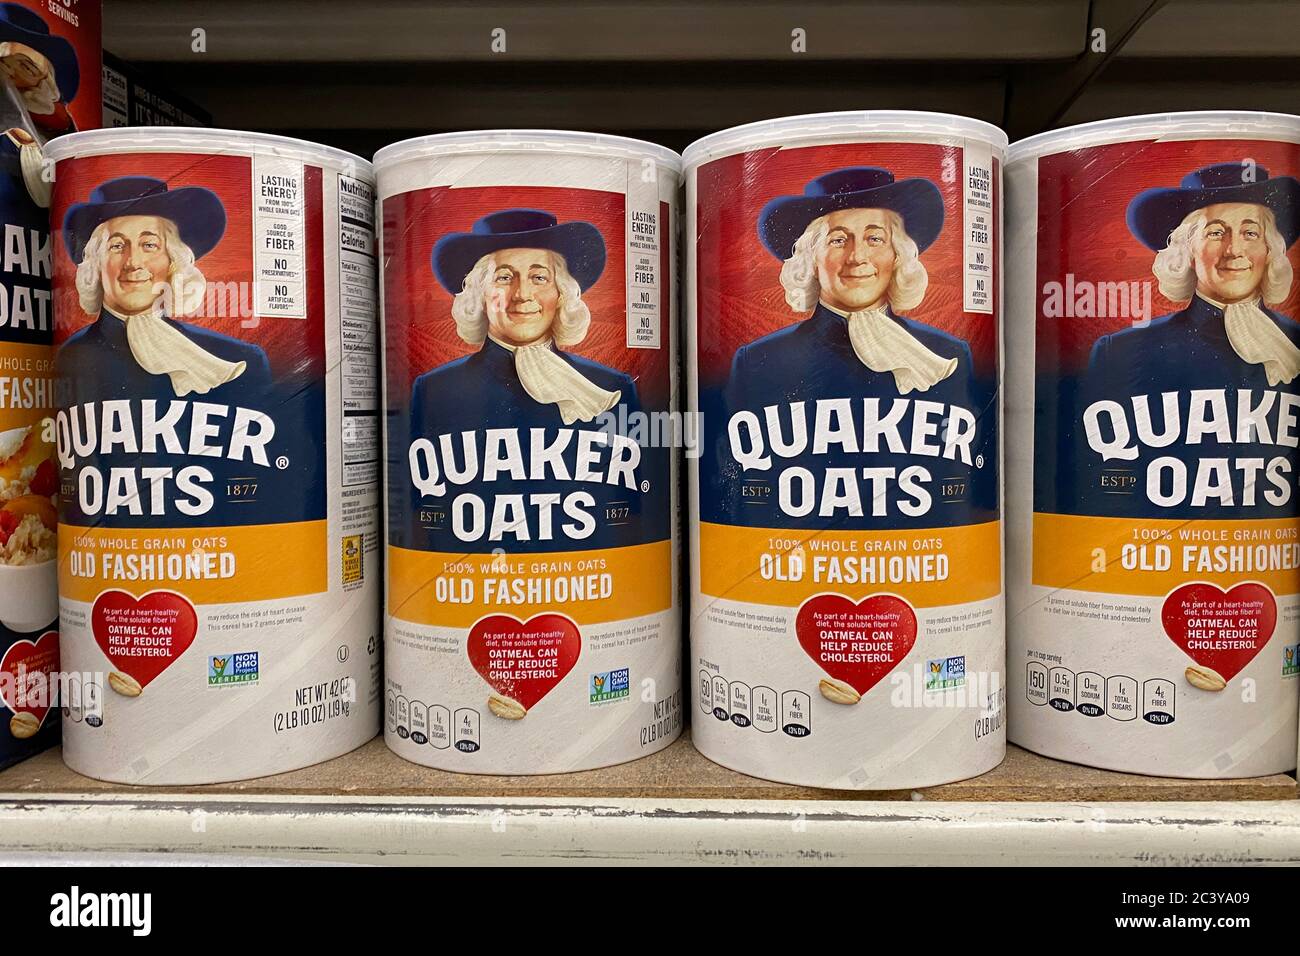 https://c8.alamy.com/comp/2C3YA09/montebello-united-states-22nd-june-2020-quaker-oats-old-fashioned-oatmeal-containers-on-display-monday-june-22-2020-in-montebello-calif-quaker-oats-a-subsidiary-of-pepsico-is-retiring-the-131-year-old-aunt-jemima-brand-saying-the-company-recognizes-the-characters-origins-are-based-on-a-racial-stereotype-the-brand-logo-features-an-african-american-woman-named-after-a-character-from-19th-century-minstrel-shows-photo-via-credit-newscomalamy-live-news-2C3YA09.jpg